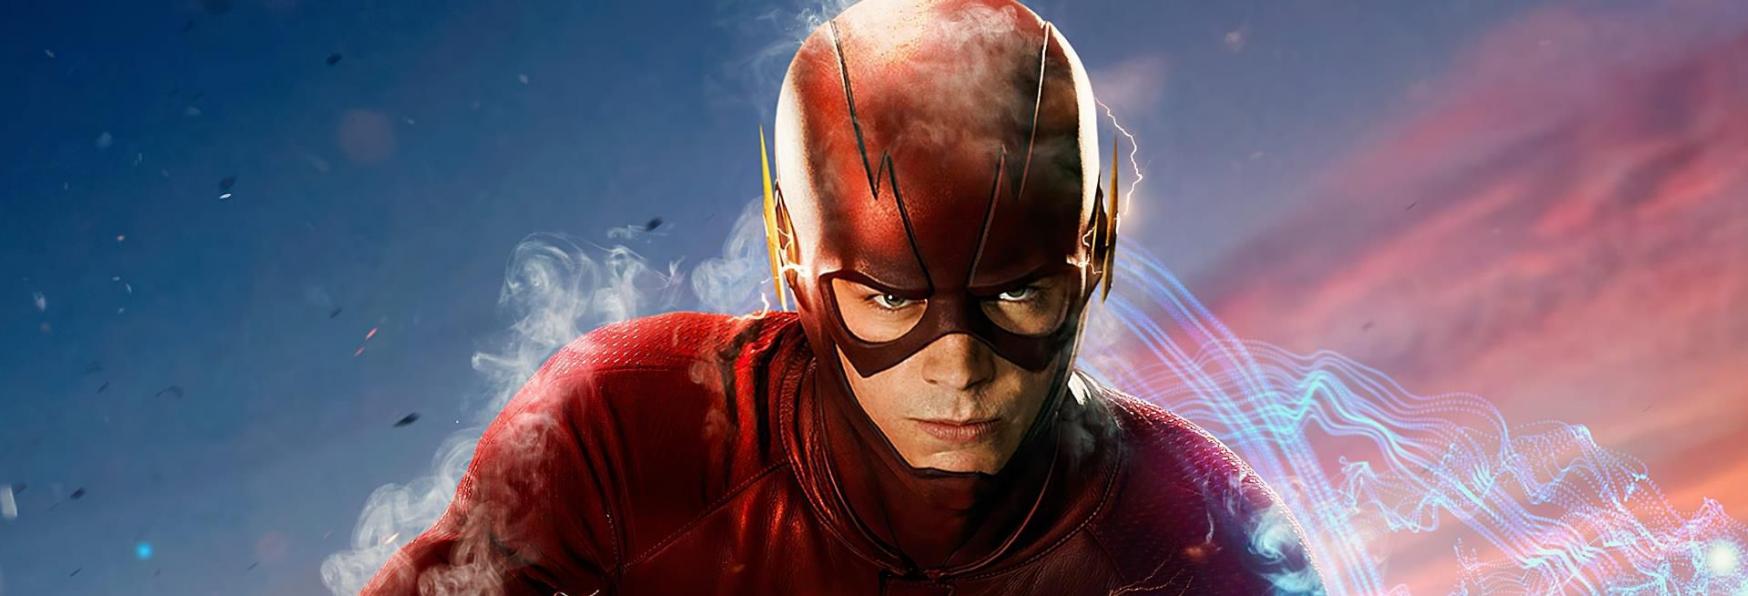 The Flash 8x20: the Video Preview of the Season Finale, "Negative, Part Two"